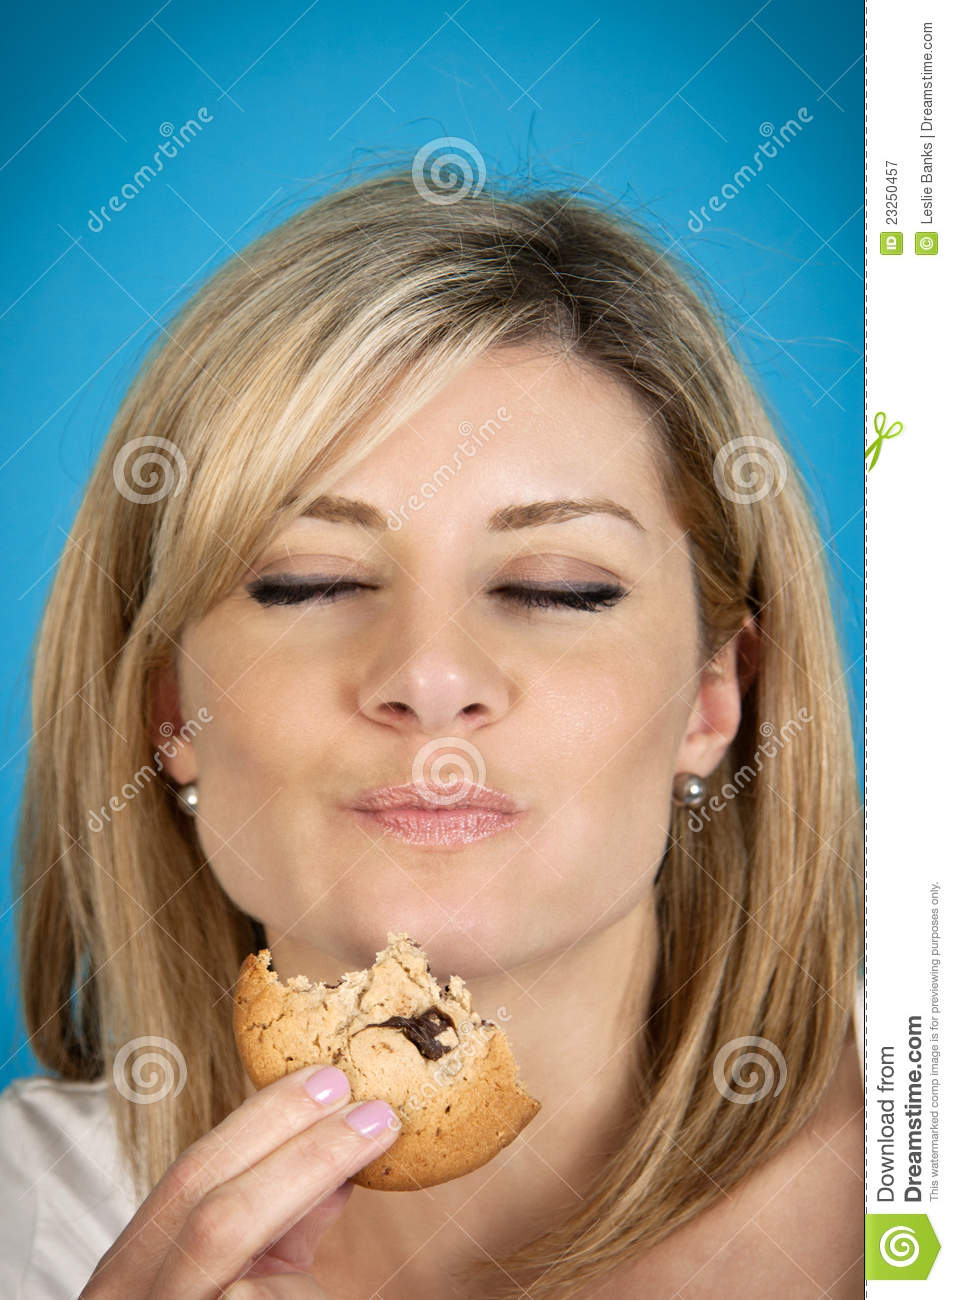 Woman Eating Cookie Royalty Free Stock Photography   Image  23250457